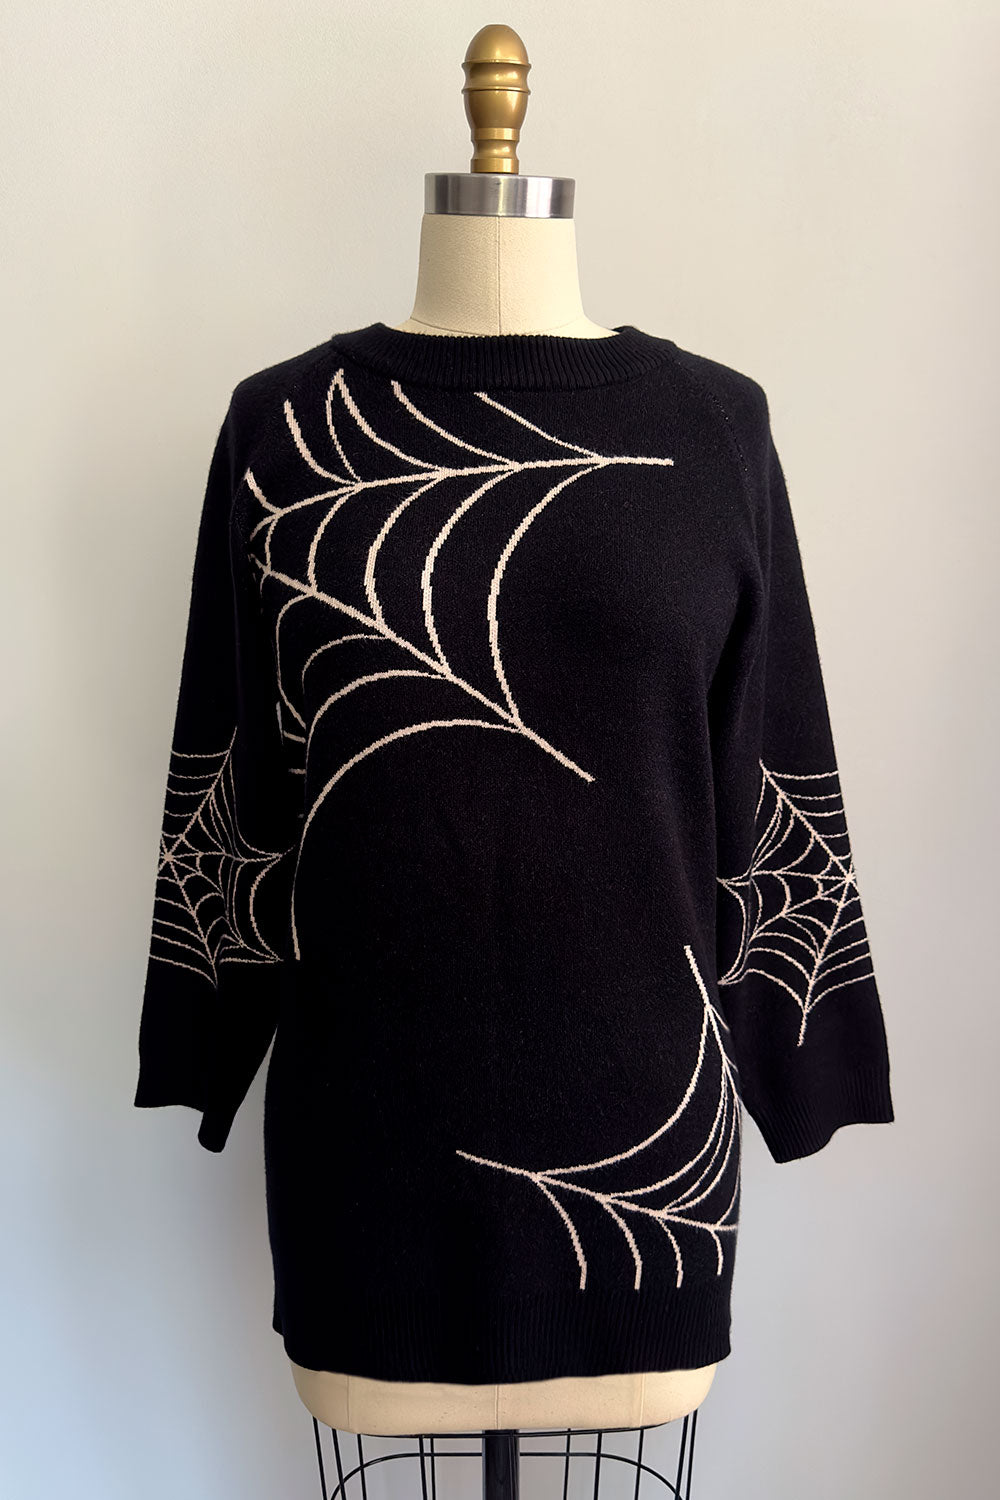 Whimsical Web Sweater Black with Ivory Spiderwebs